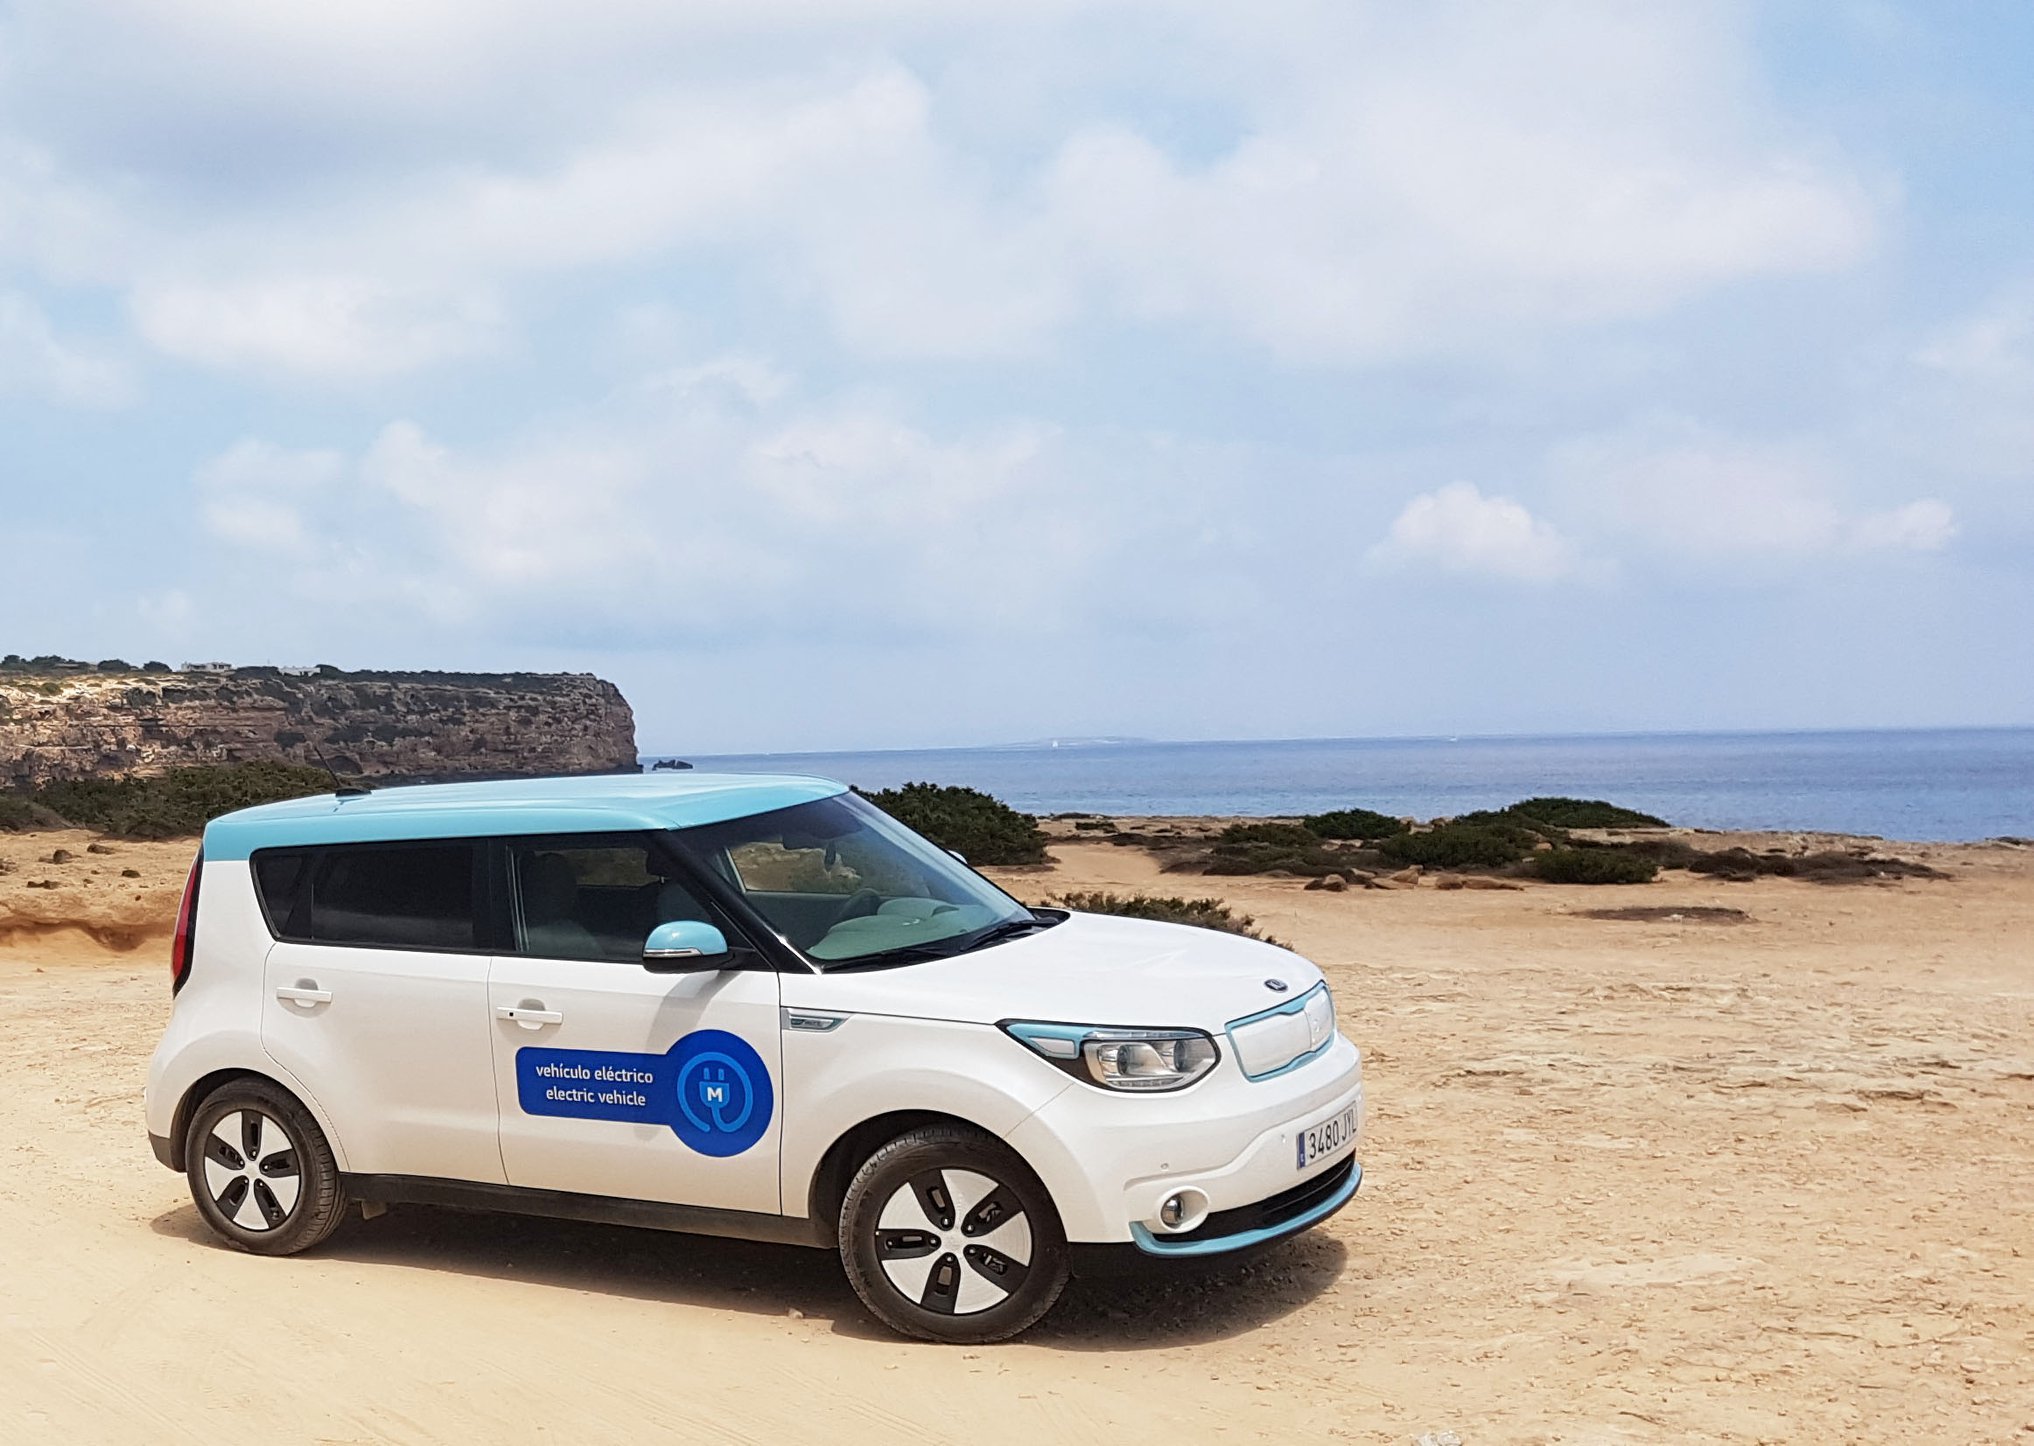 The ideal vehicle to tour Formentera